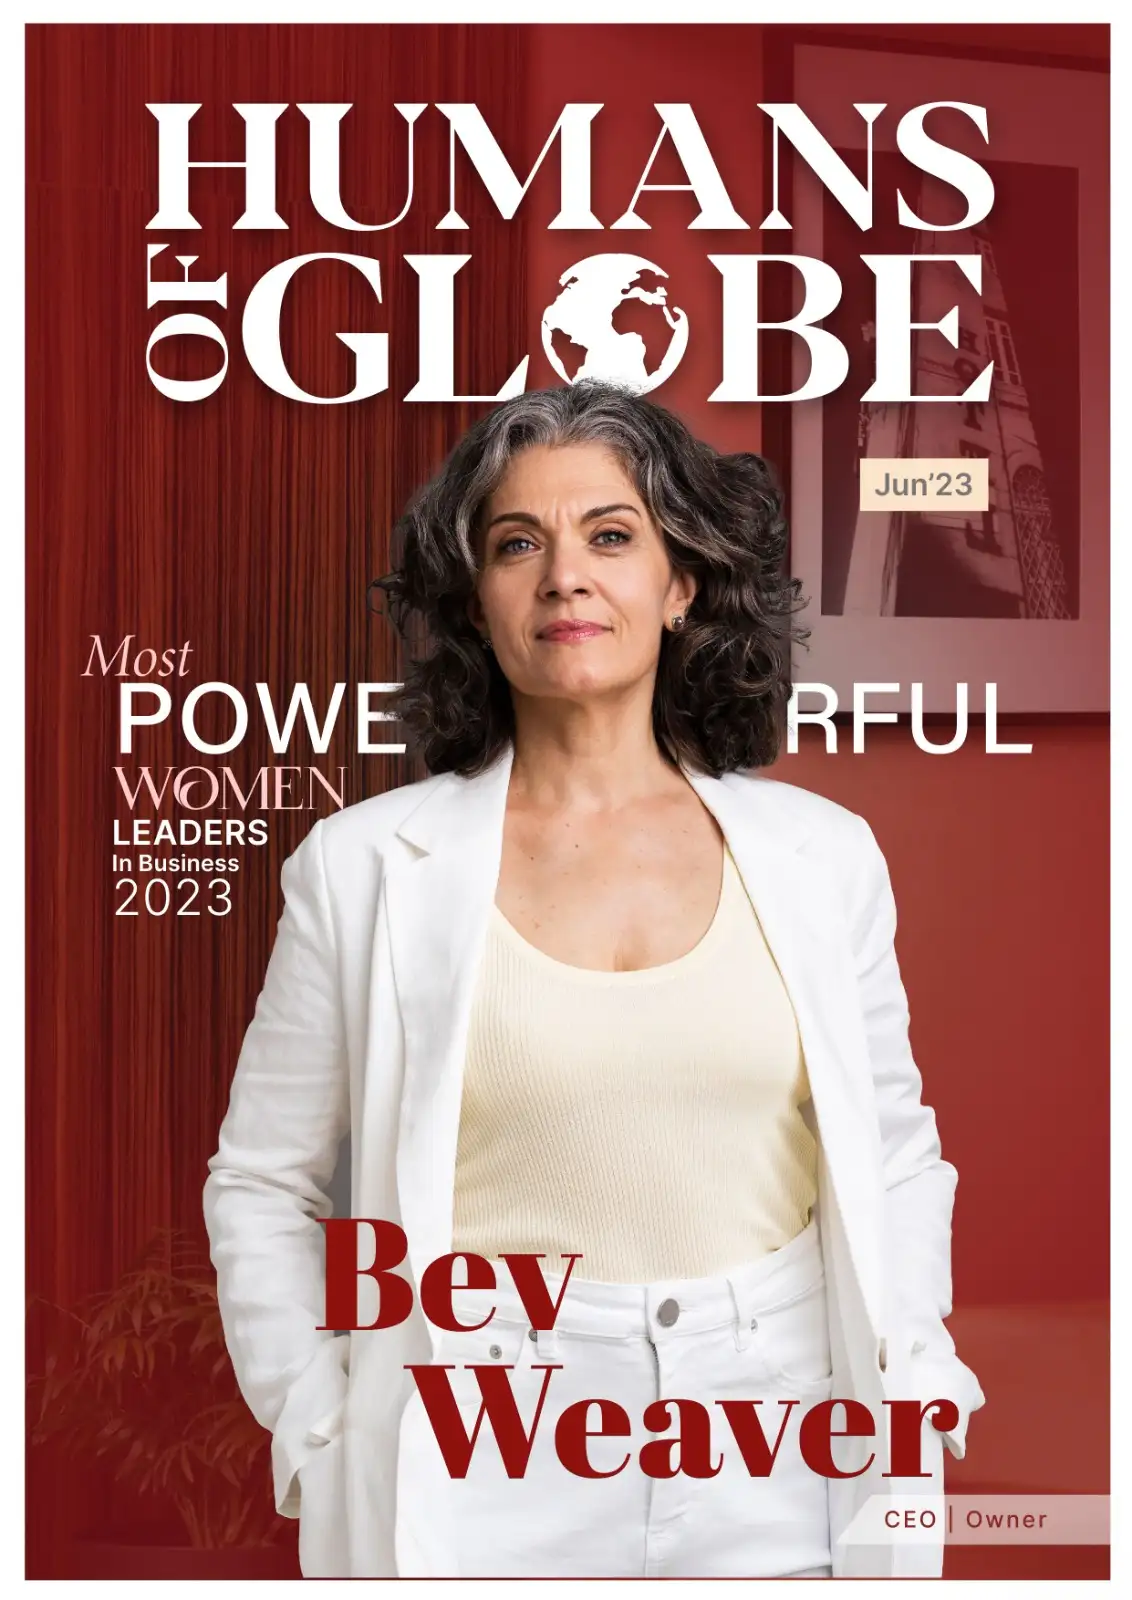 Most Powerful Women Leaders in Business 2023 - Cover